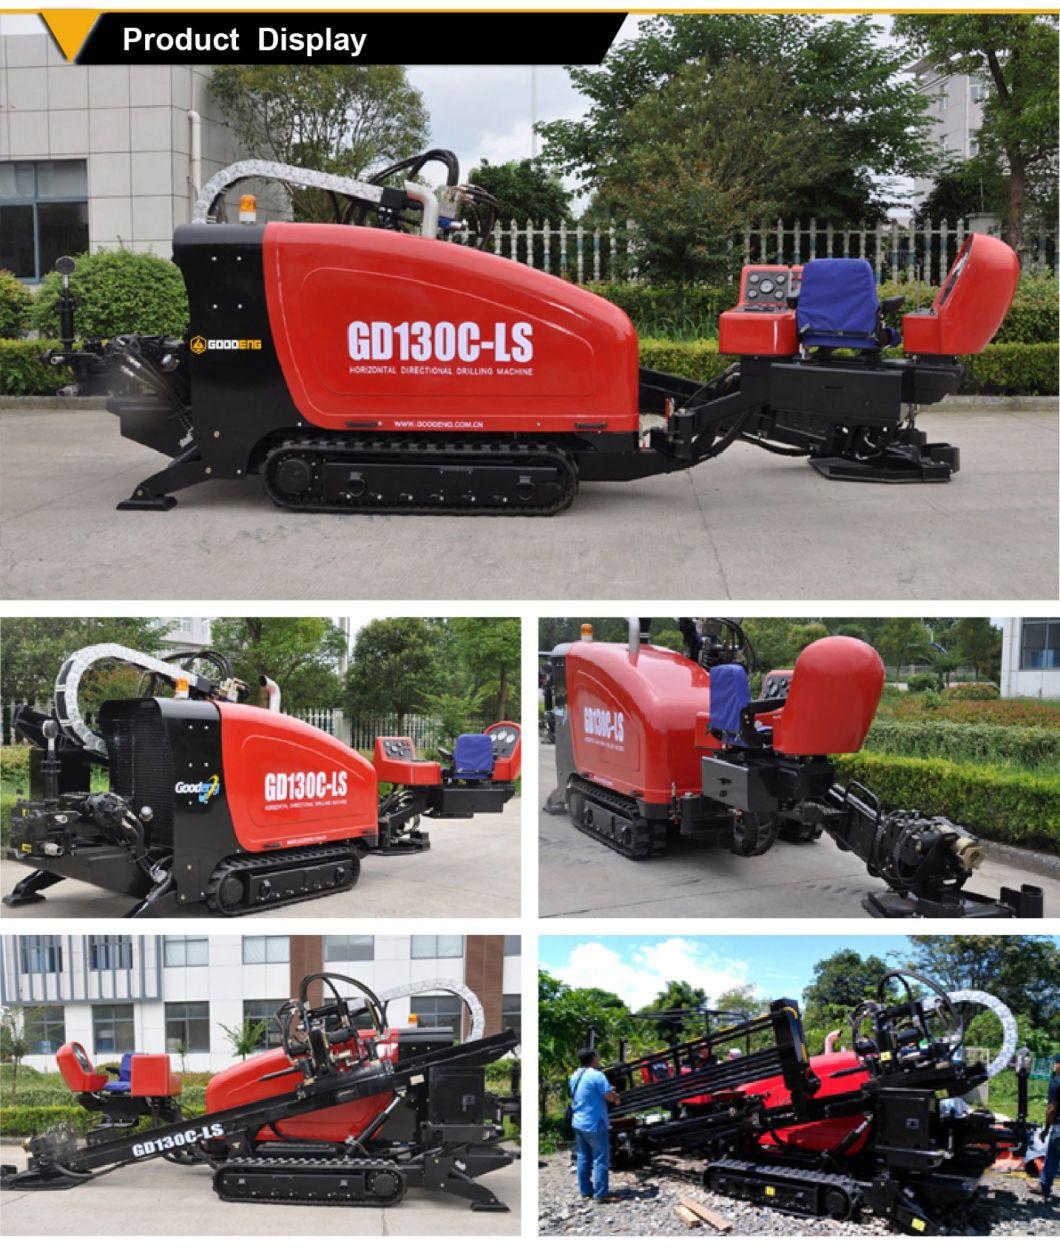 Humanized-design workable GD130C-LS pipeline crossing machine